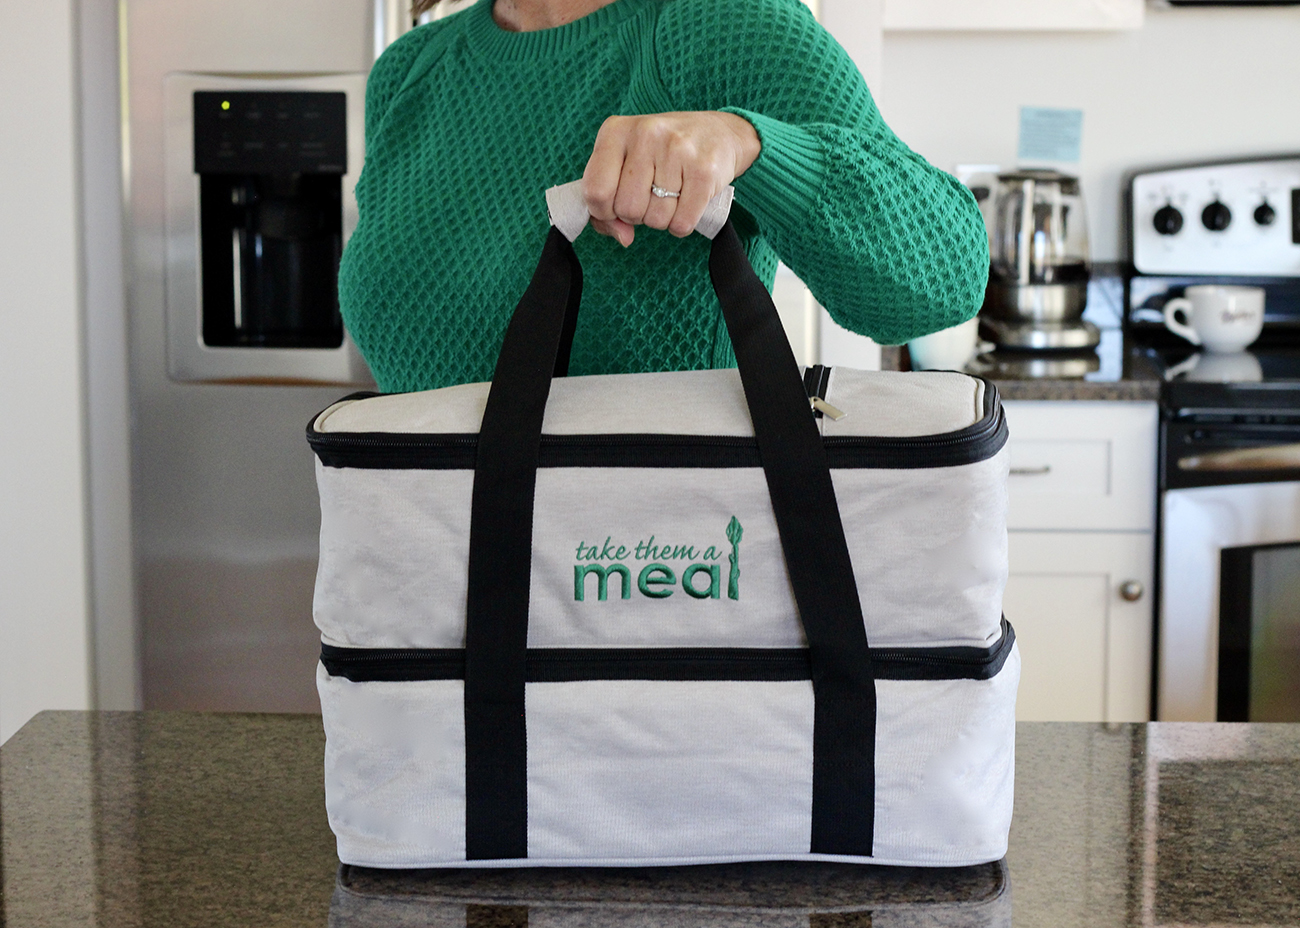 Only a Few Days Left to Order our New Meal Carriers